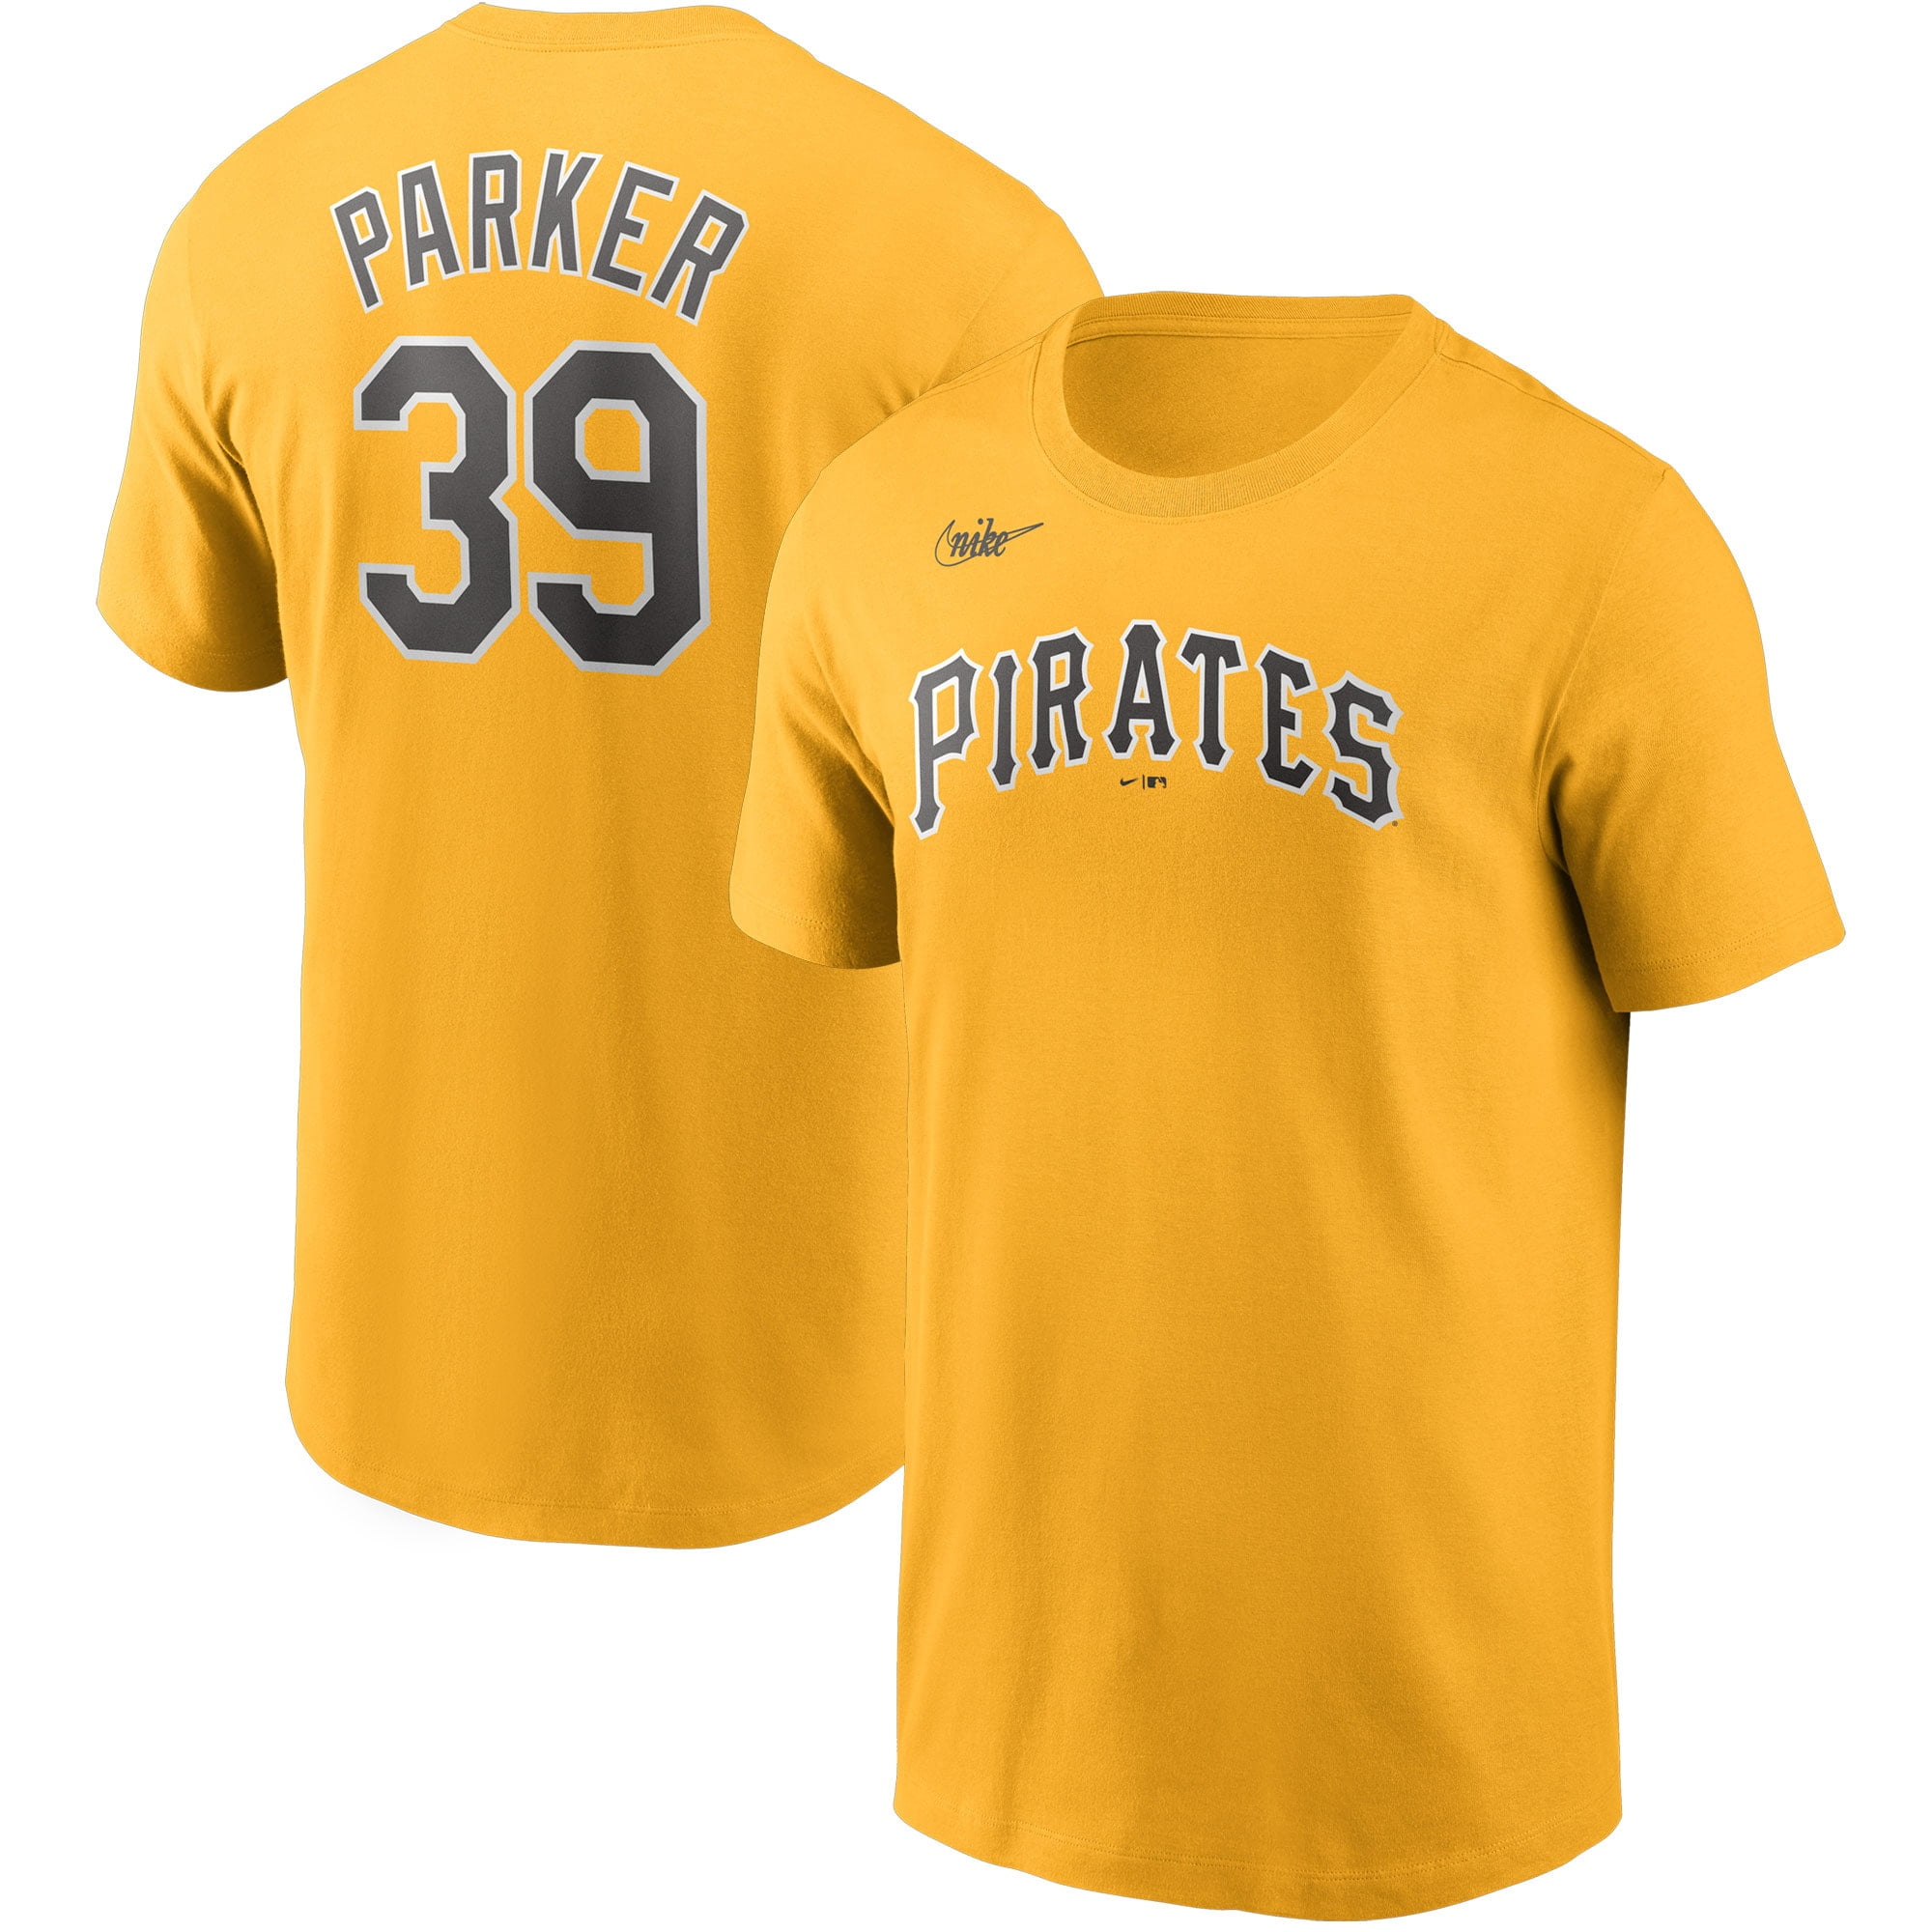 Men's Nike Dave Parker Gold Pittsburgh Pirates & Number T-Shirt